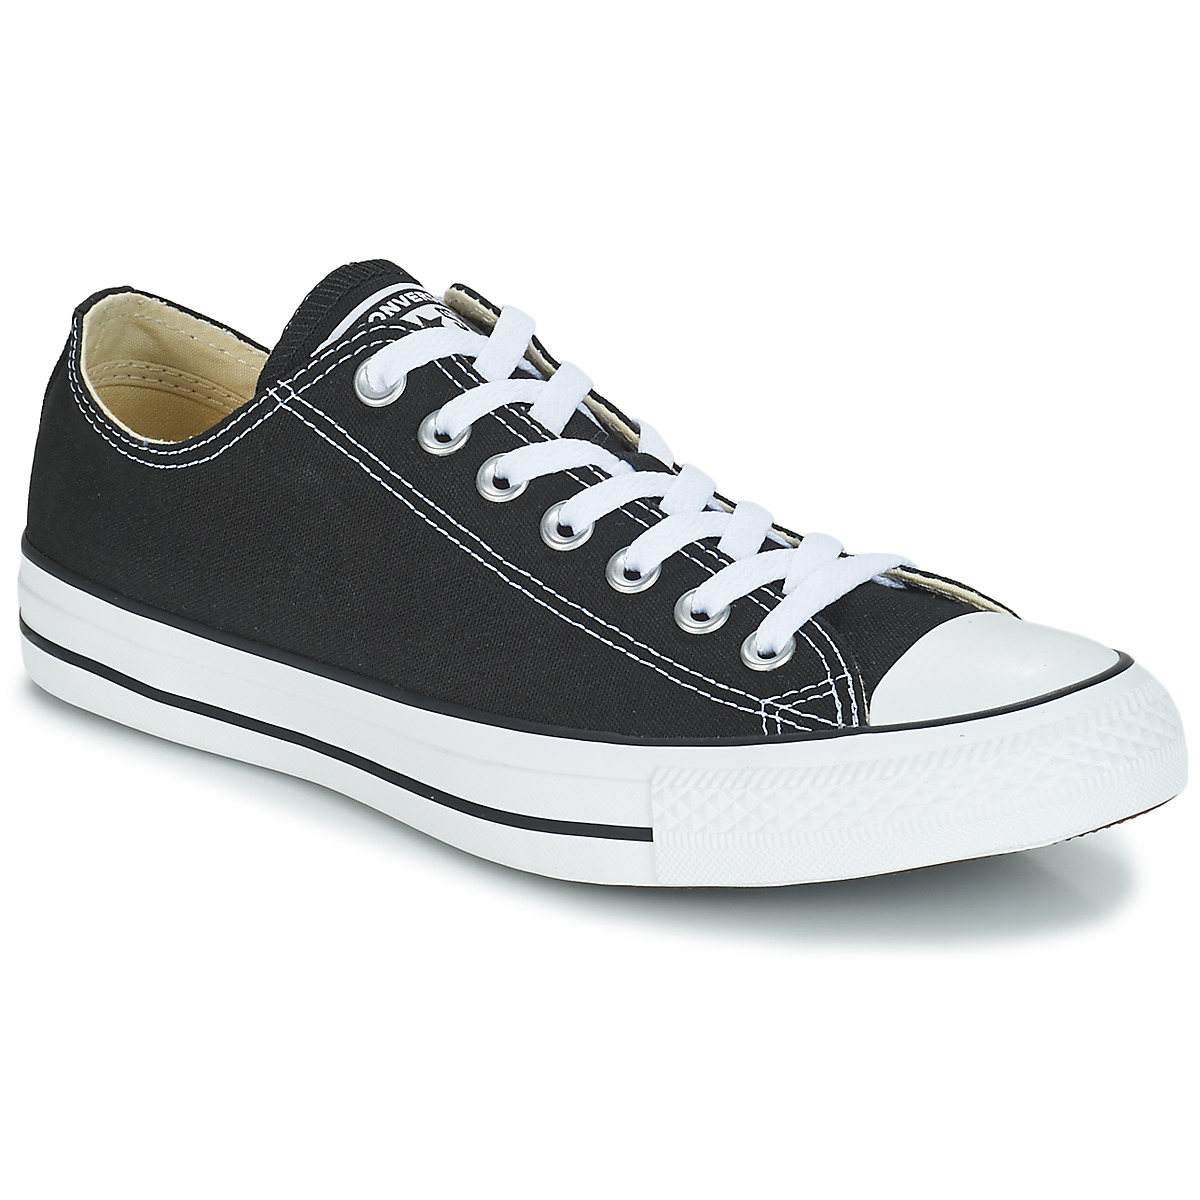 Brood dichters Conciërge Converse CHUCK TAYLOR ALL STAR CORE OX Zwart - Gratis levering | Spartoo.be  ! - Schoenen Lage sneakers € 70,00